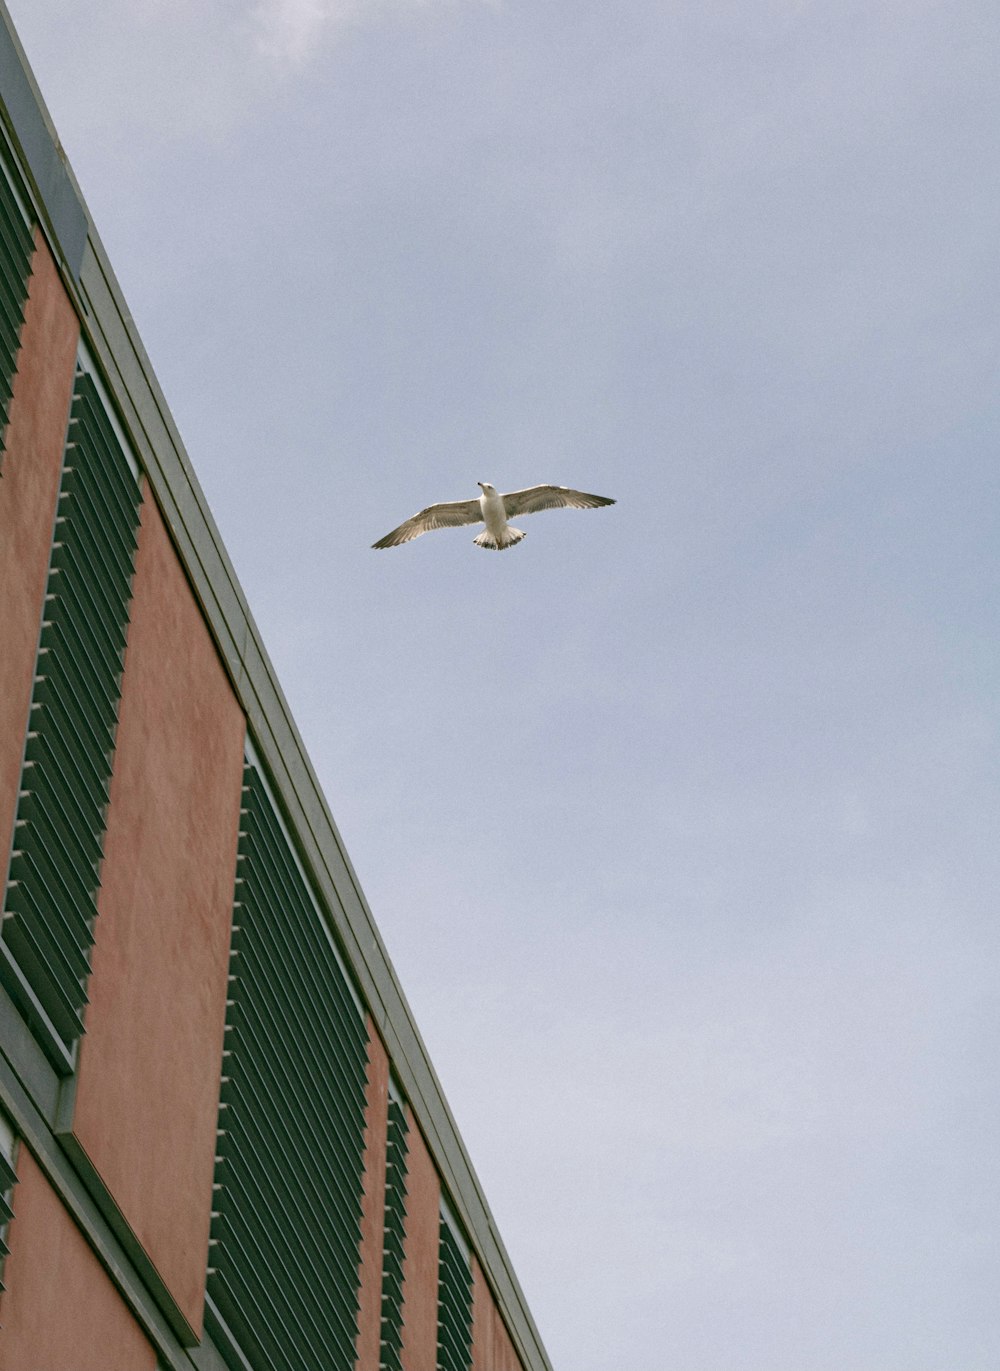 a seagull flying over a building with green shutters